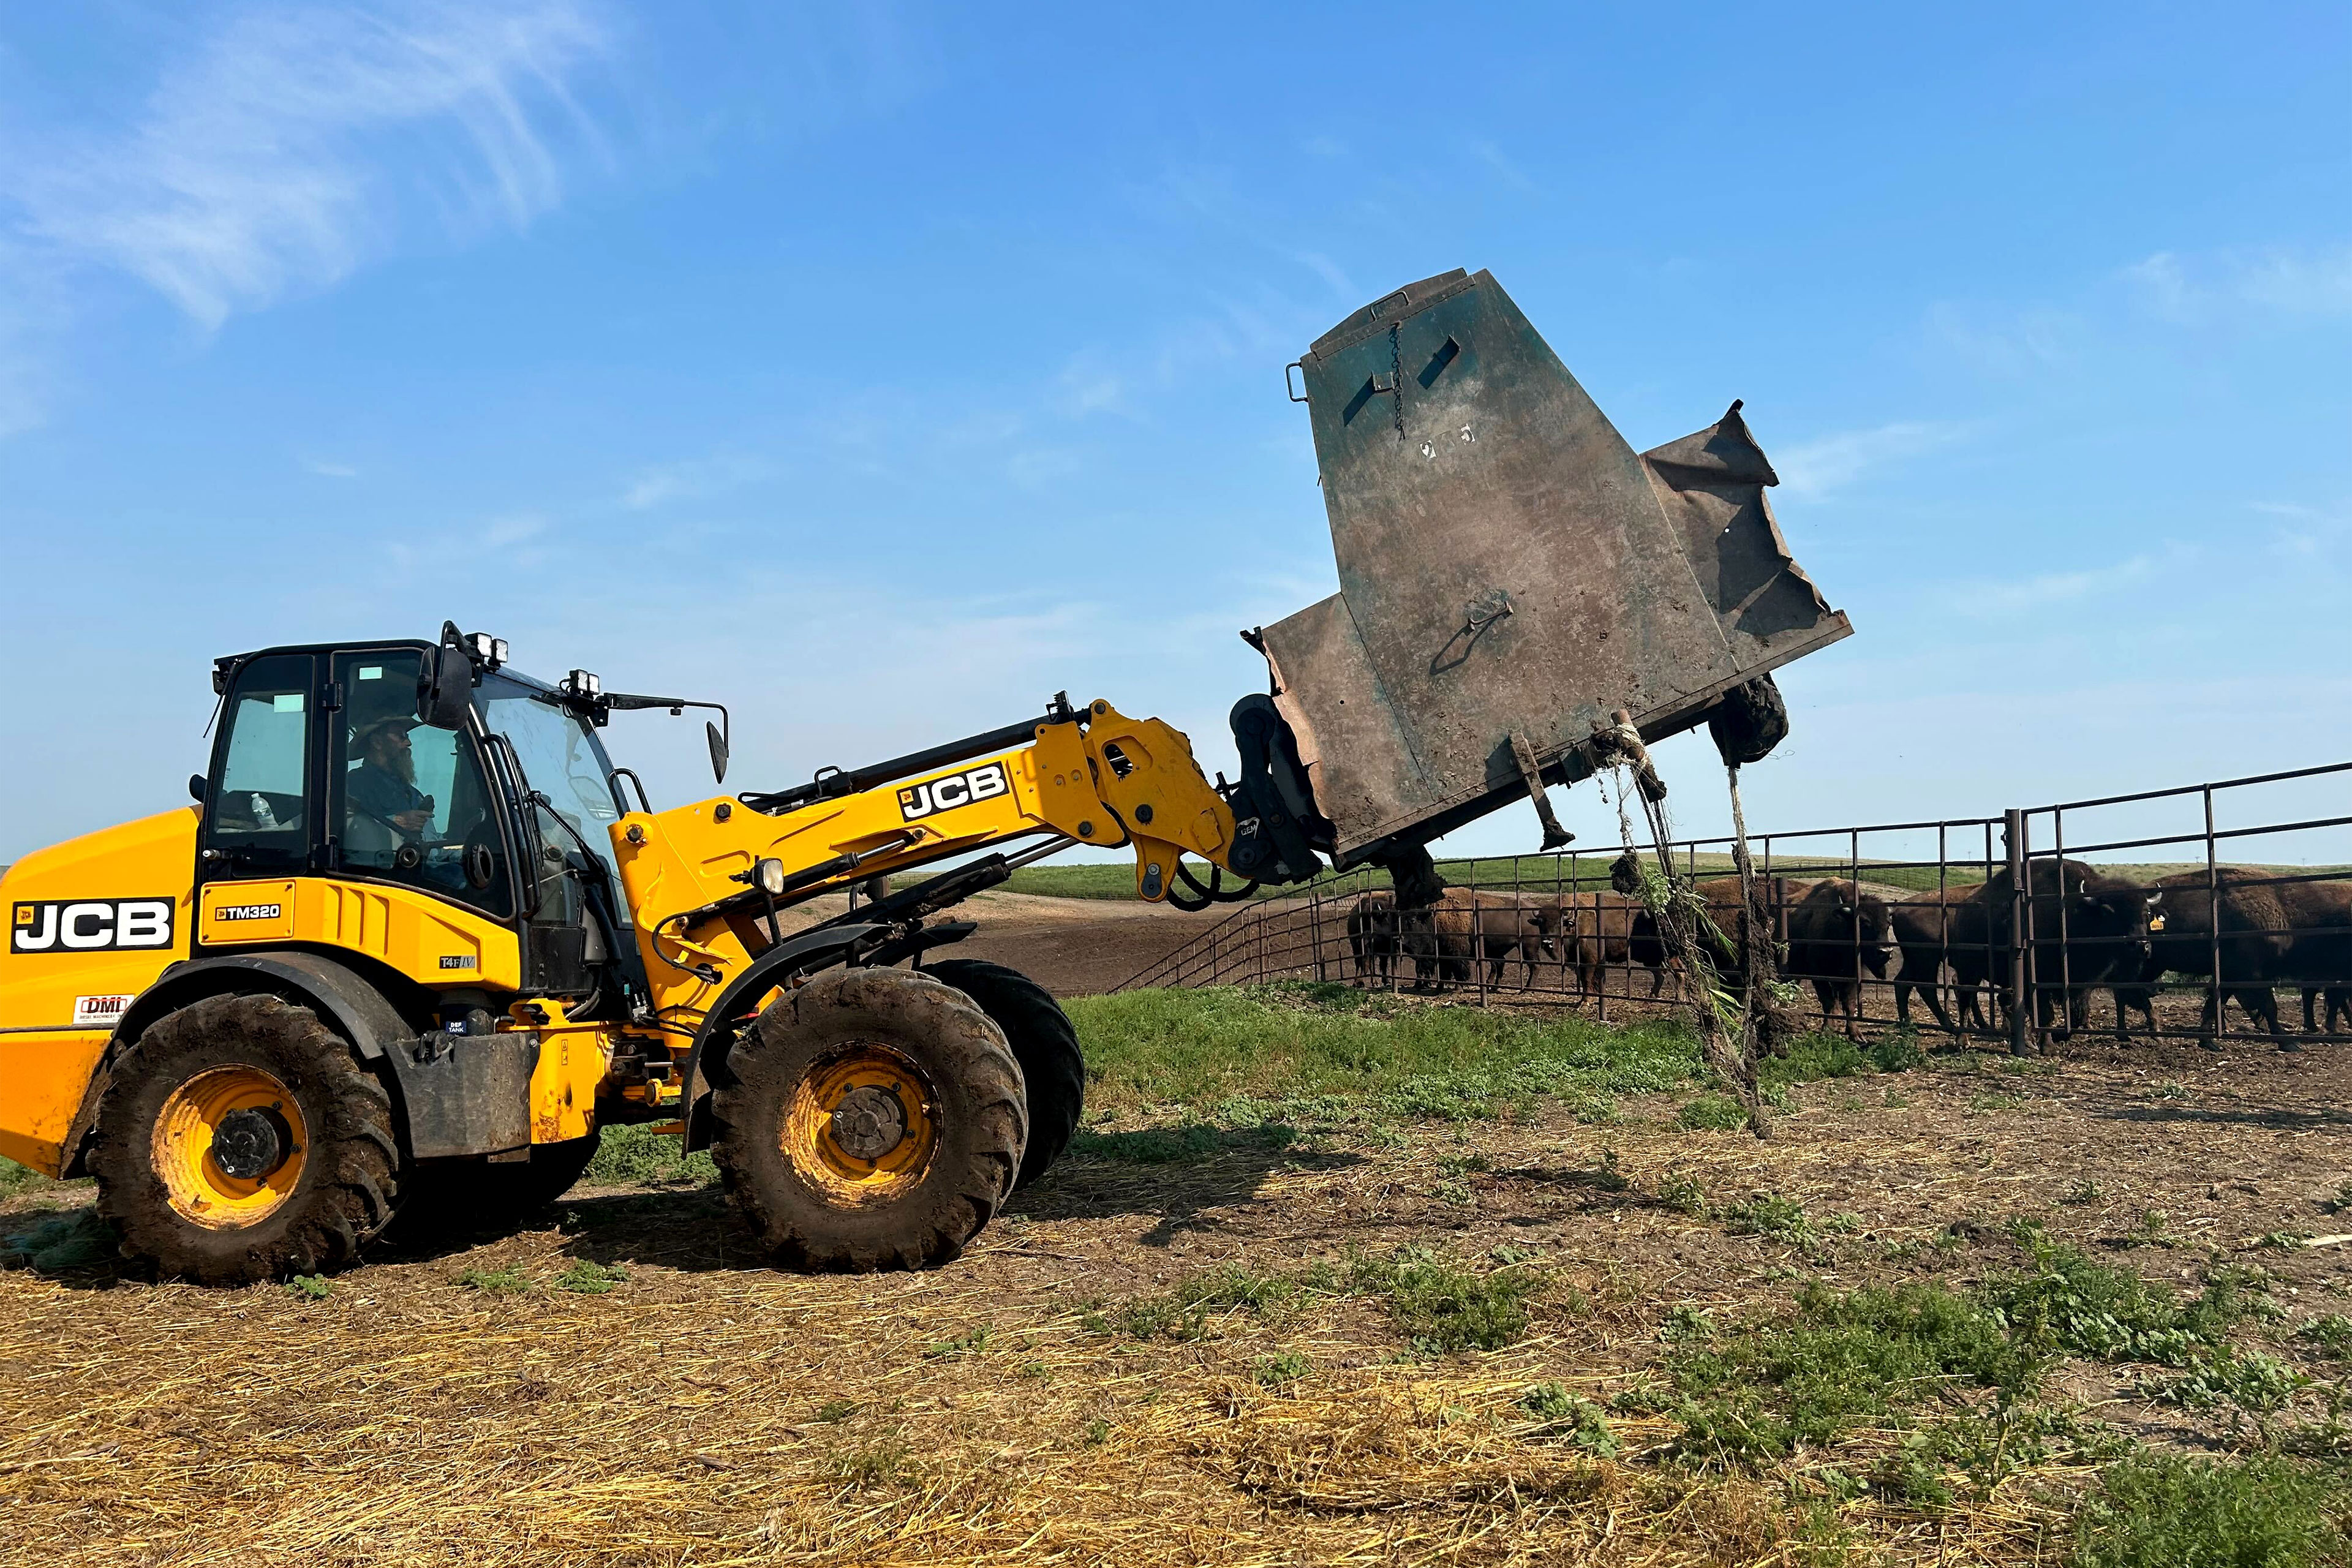 A man drives a front-end loader across a field. Bison are behind a fence in the background.